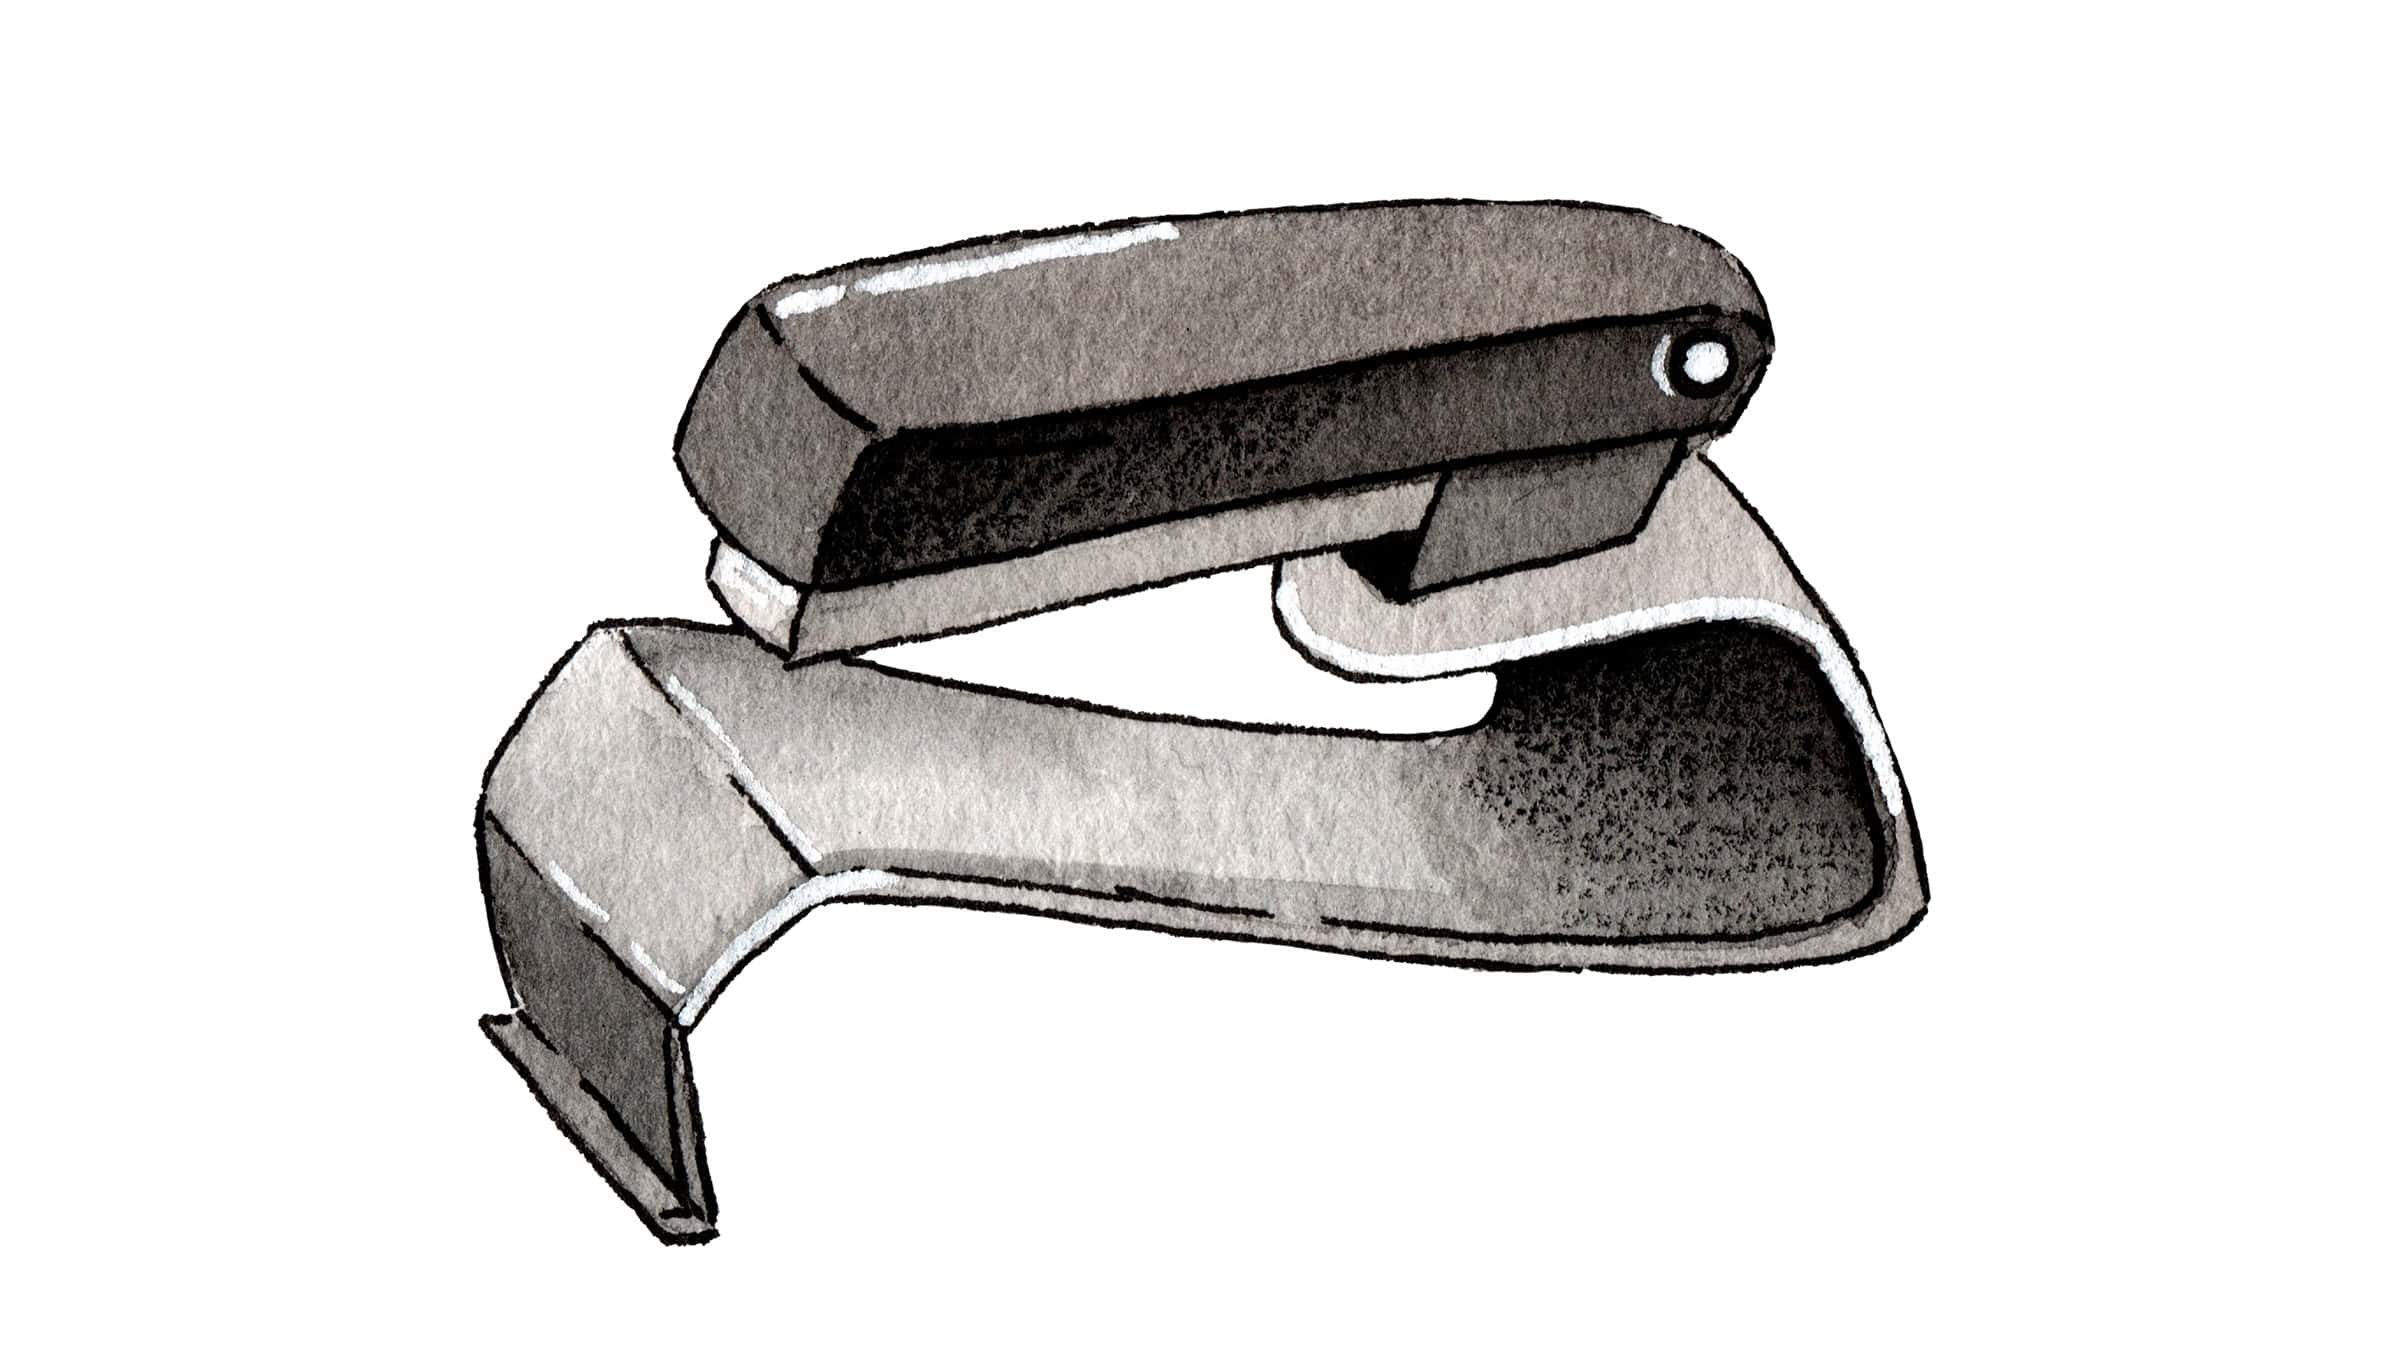 watercolor image of an unique stapler used for putting together Memorable Journals